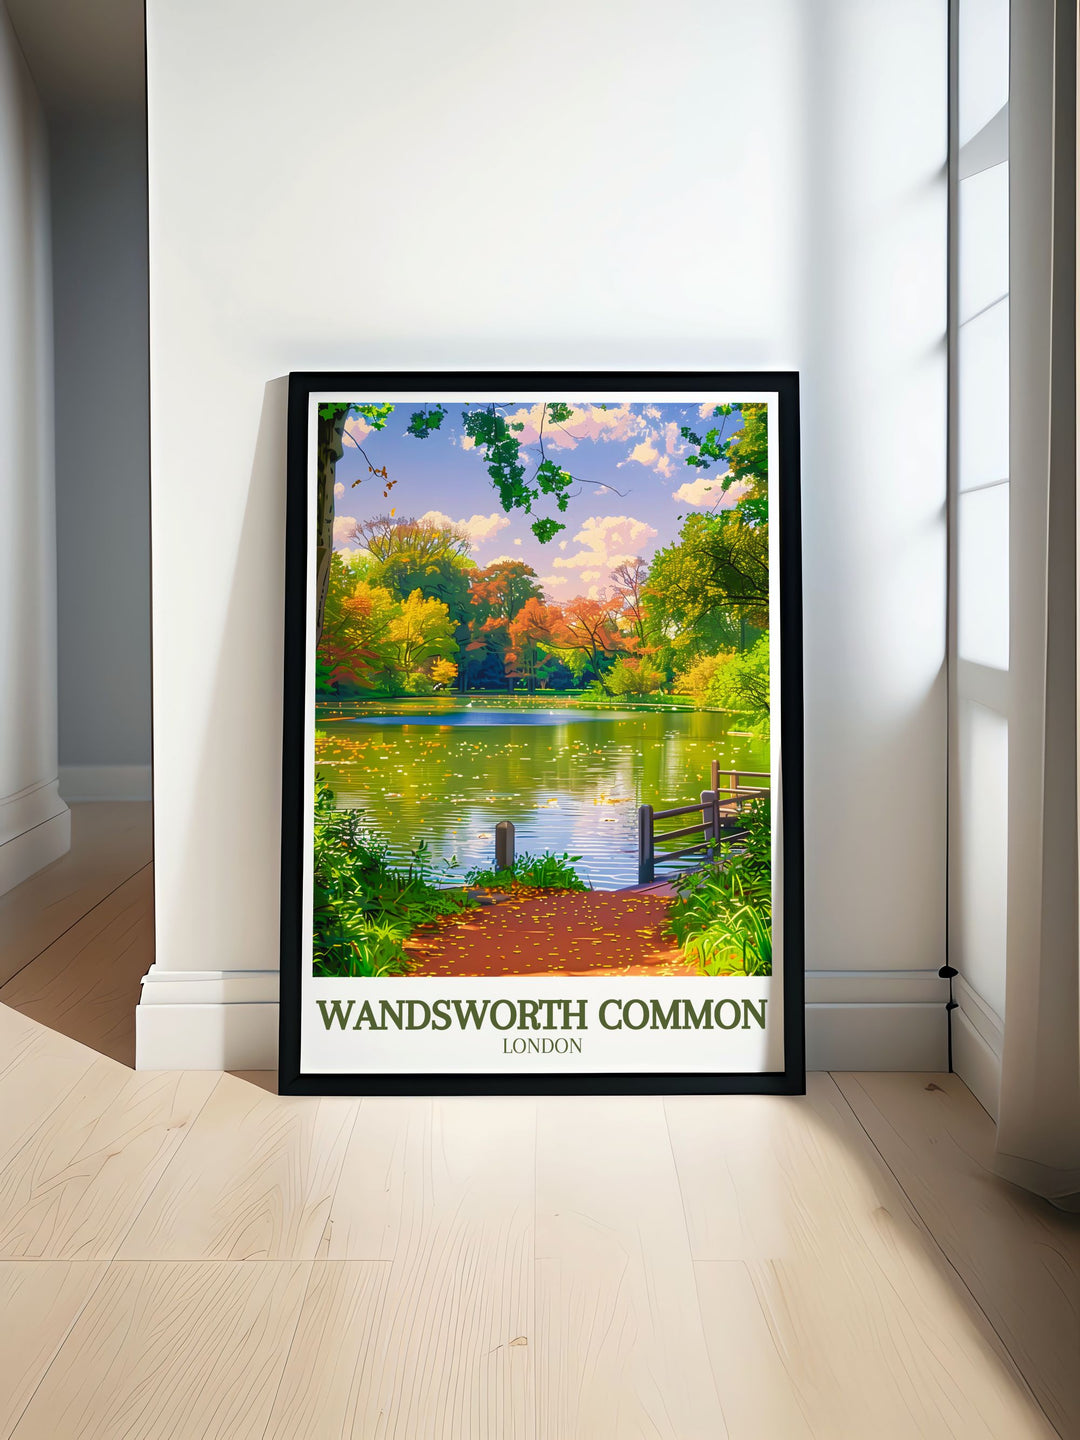 Beautiful illustration of Wandsworth Common featuring the iconic Wandsworth Windmill and lush greenery of Wandsworth Park. Perfect for those who love South London and want a stunning vintage London print for their home decor.